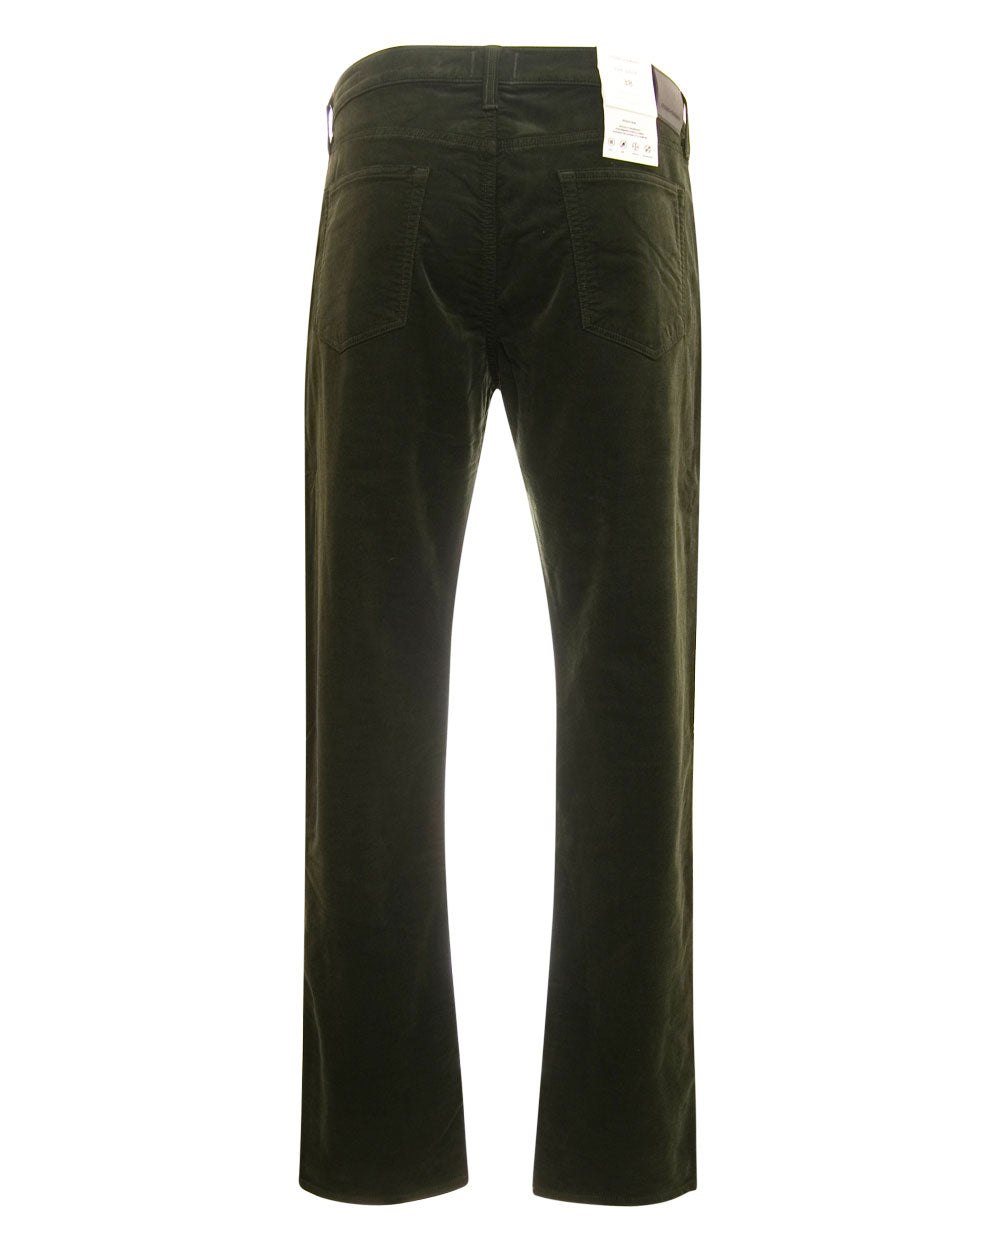 The Gage Corduroy Pant in Scout